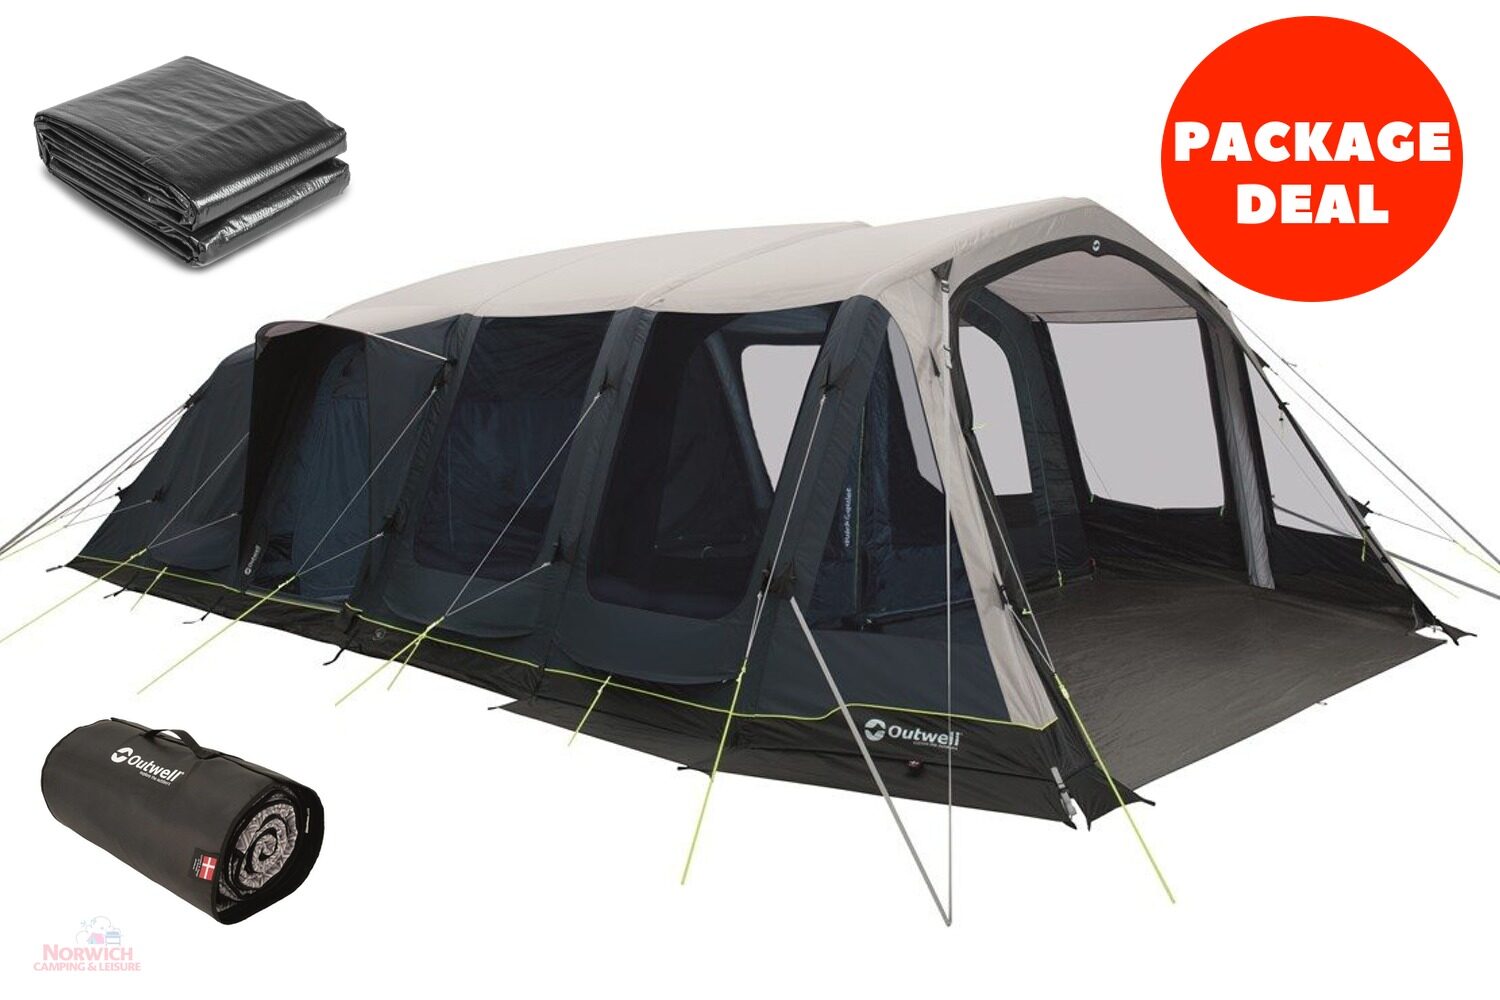 Outwell Knoxville 7Sa Air Tent Package Deal